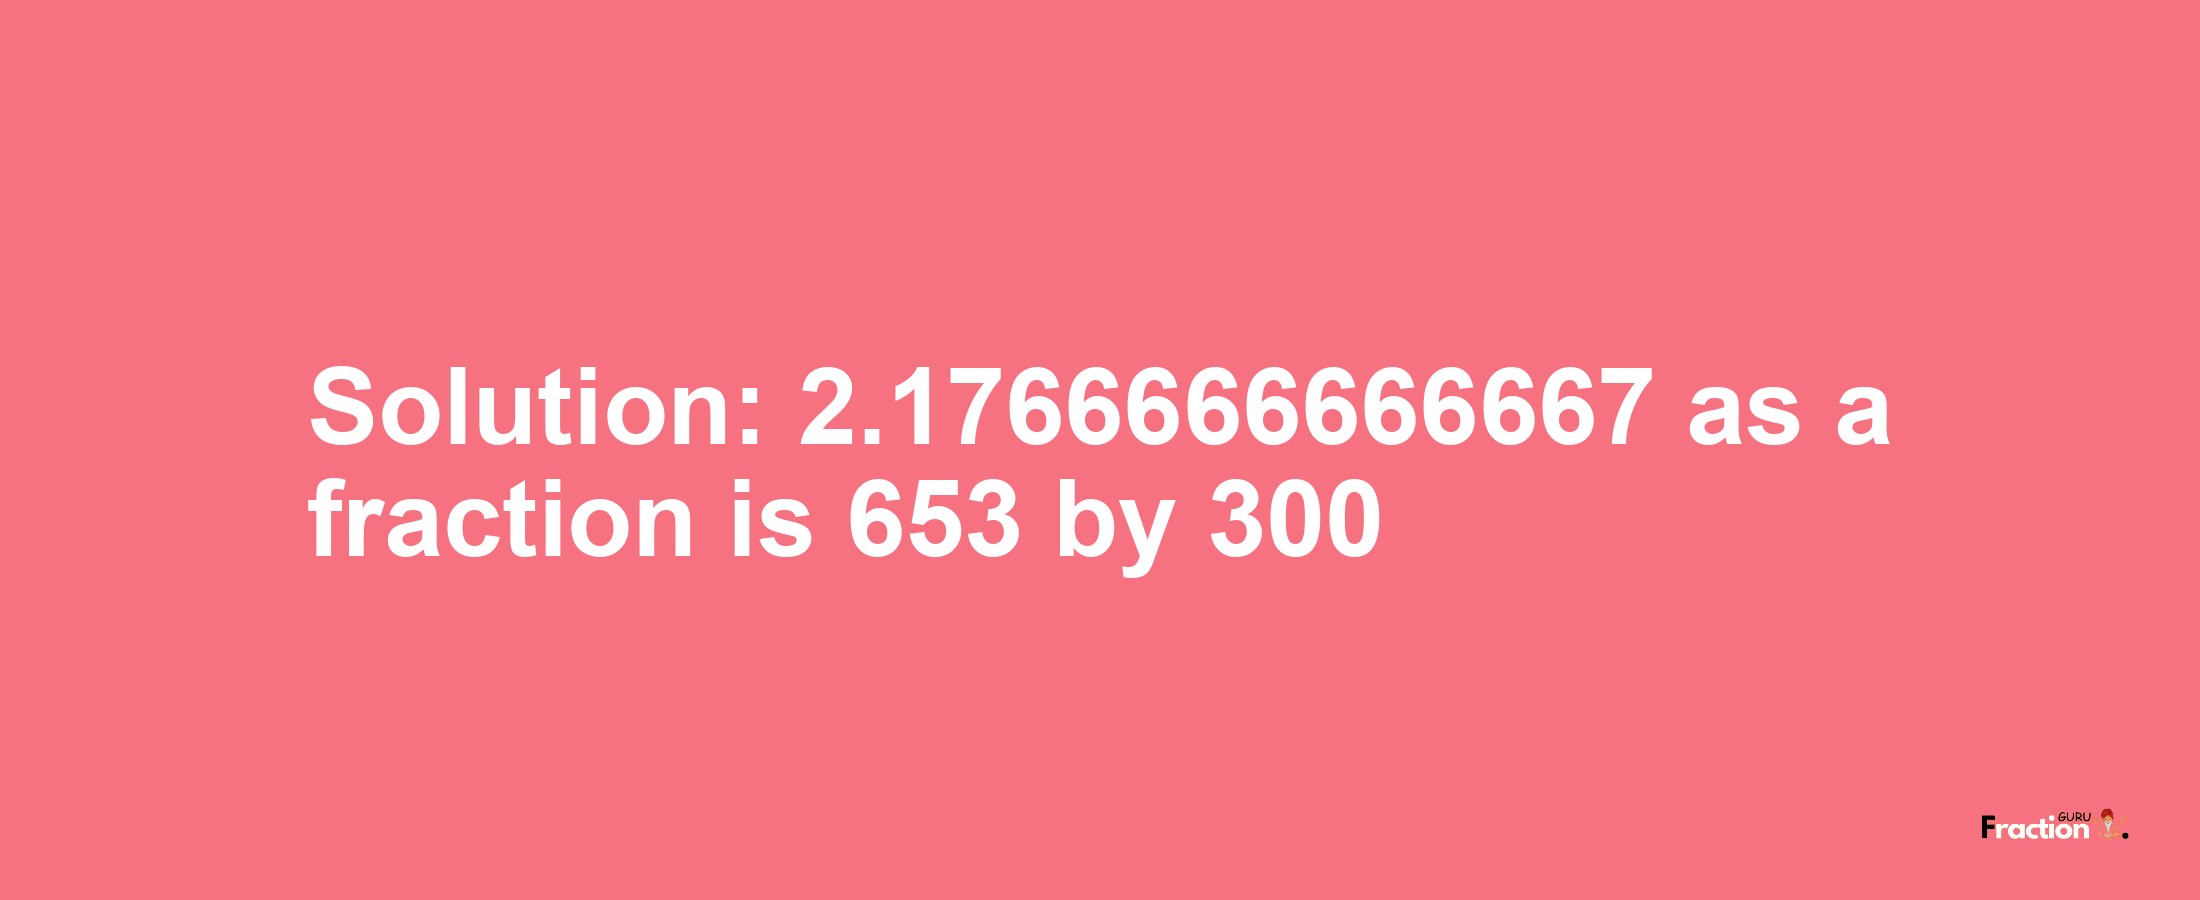 Solution:2.1766666666667 as a fraction is 653/300